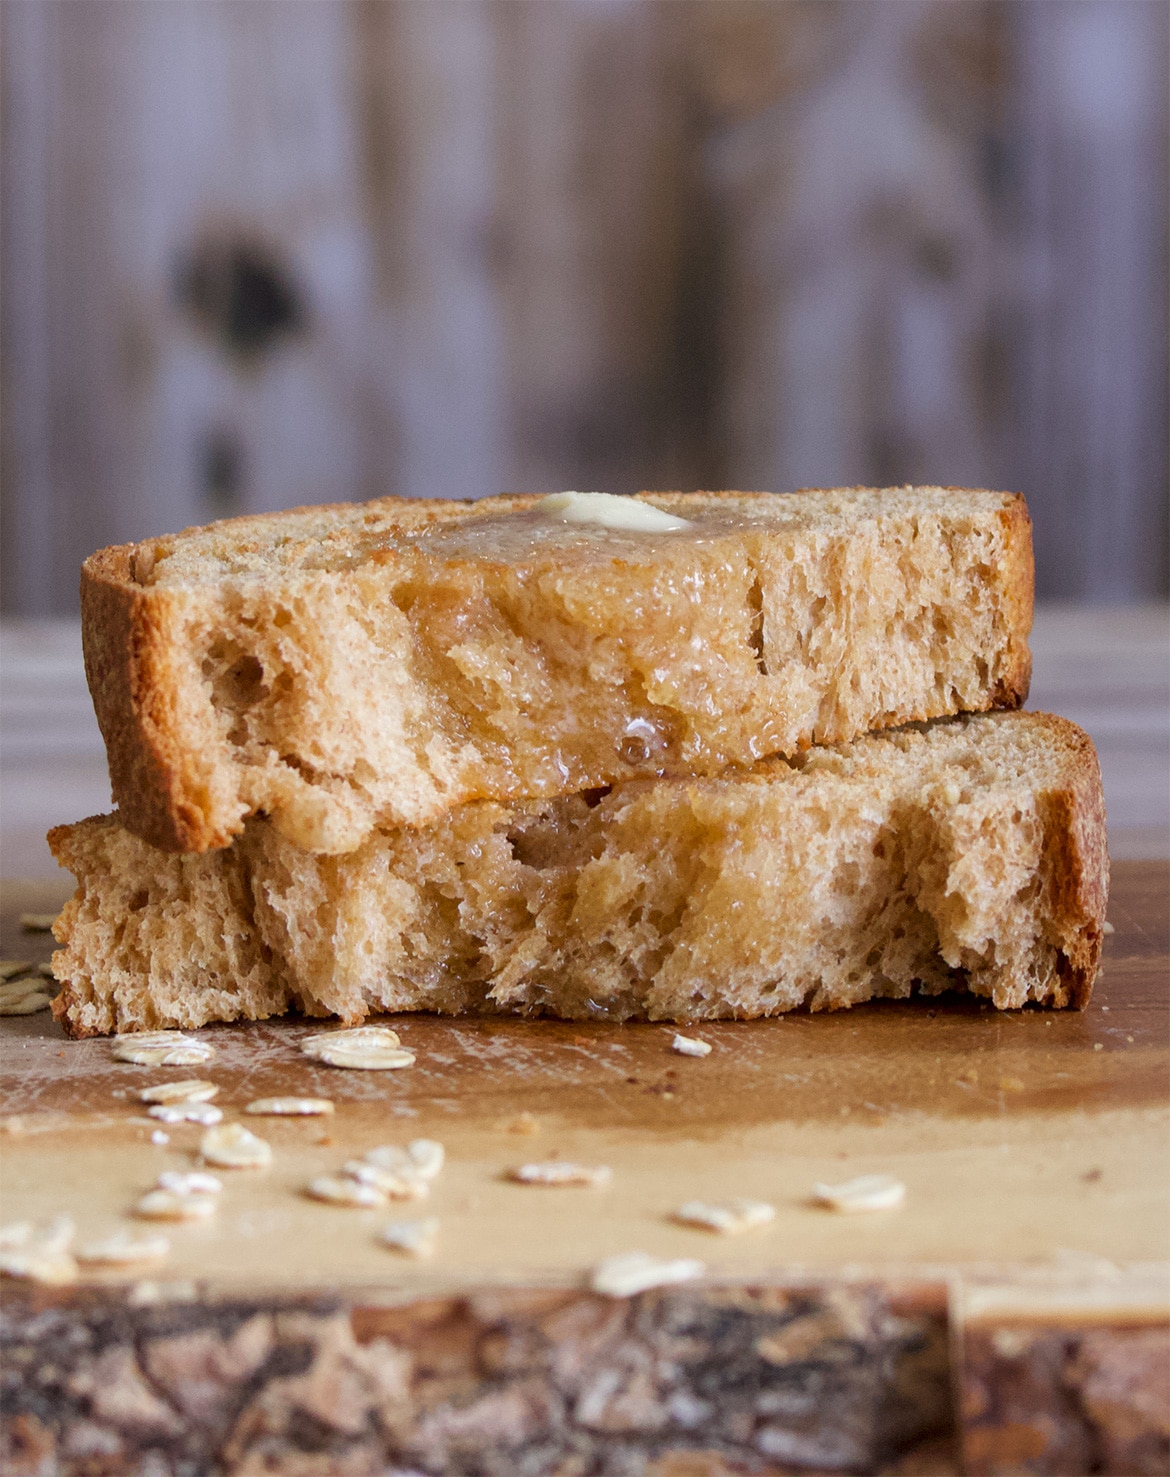 A slice of homemade whole wheat bread slathered with butter.